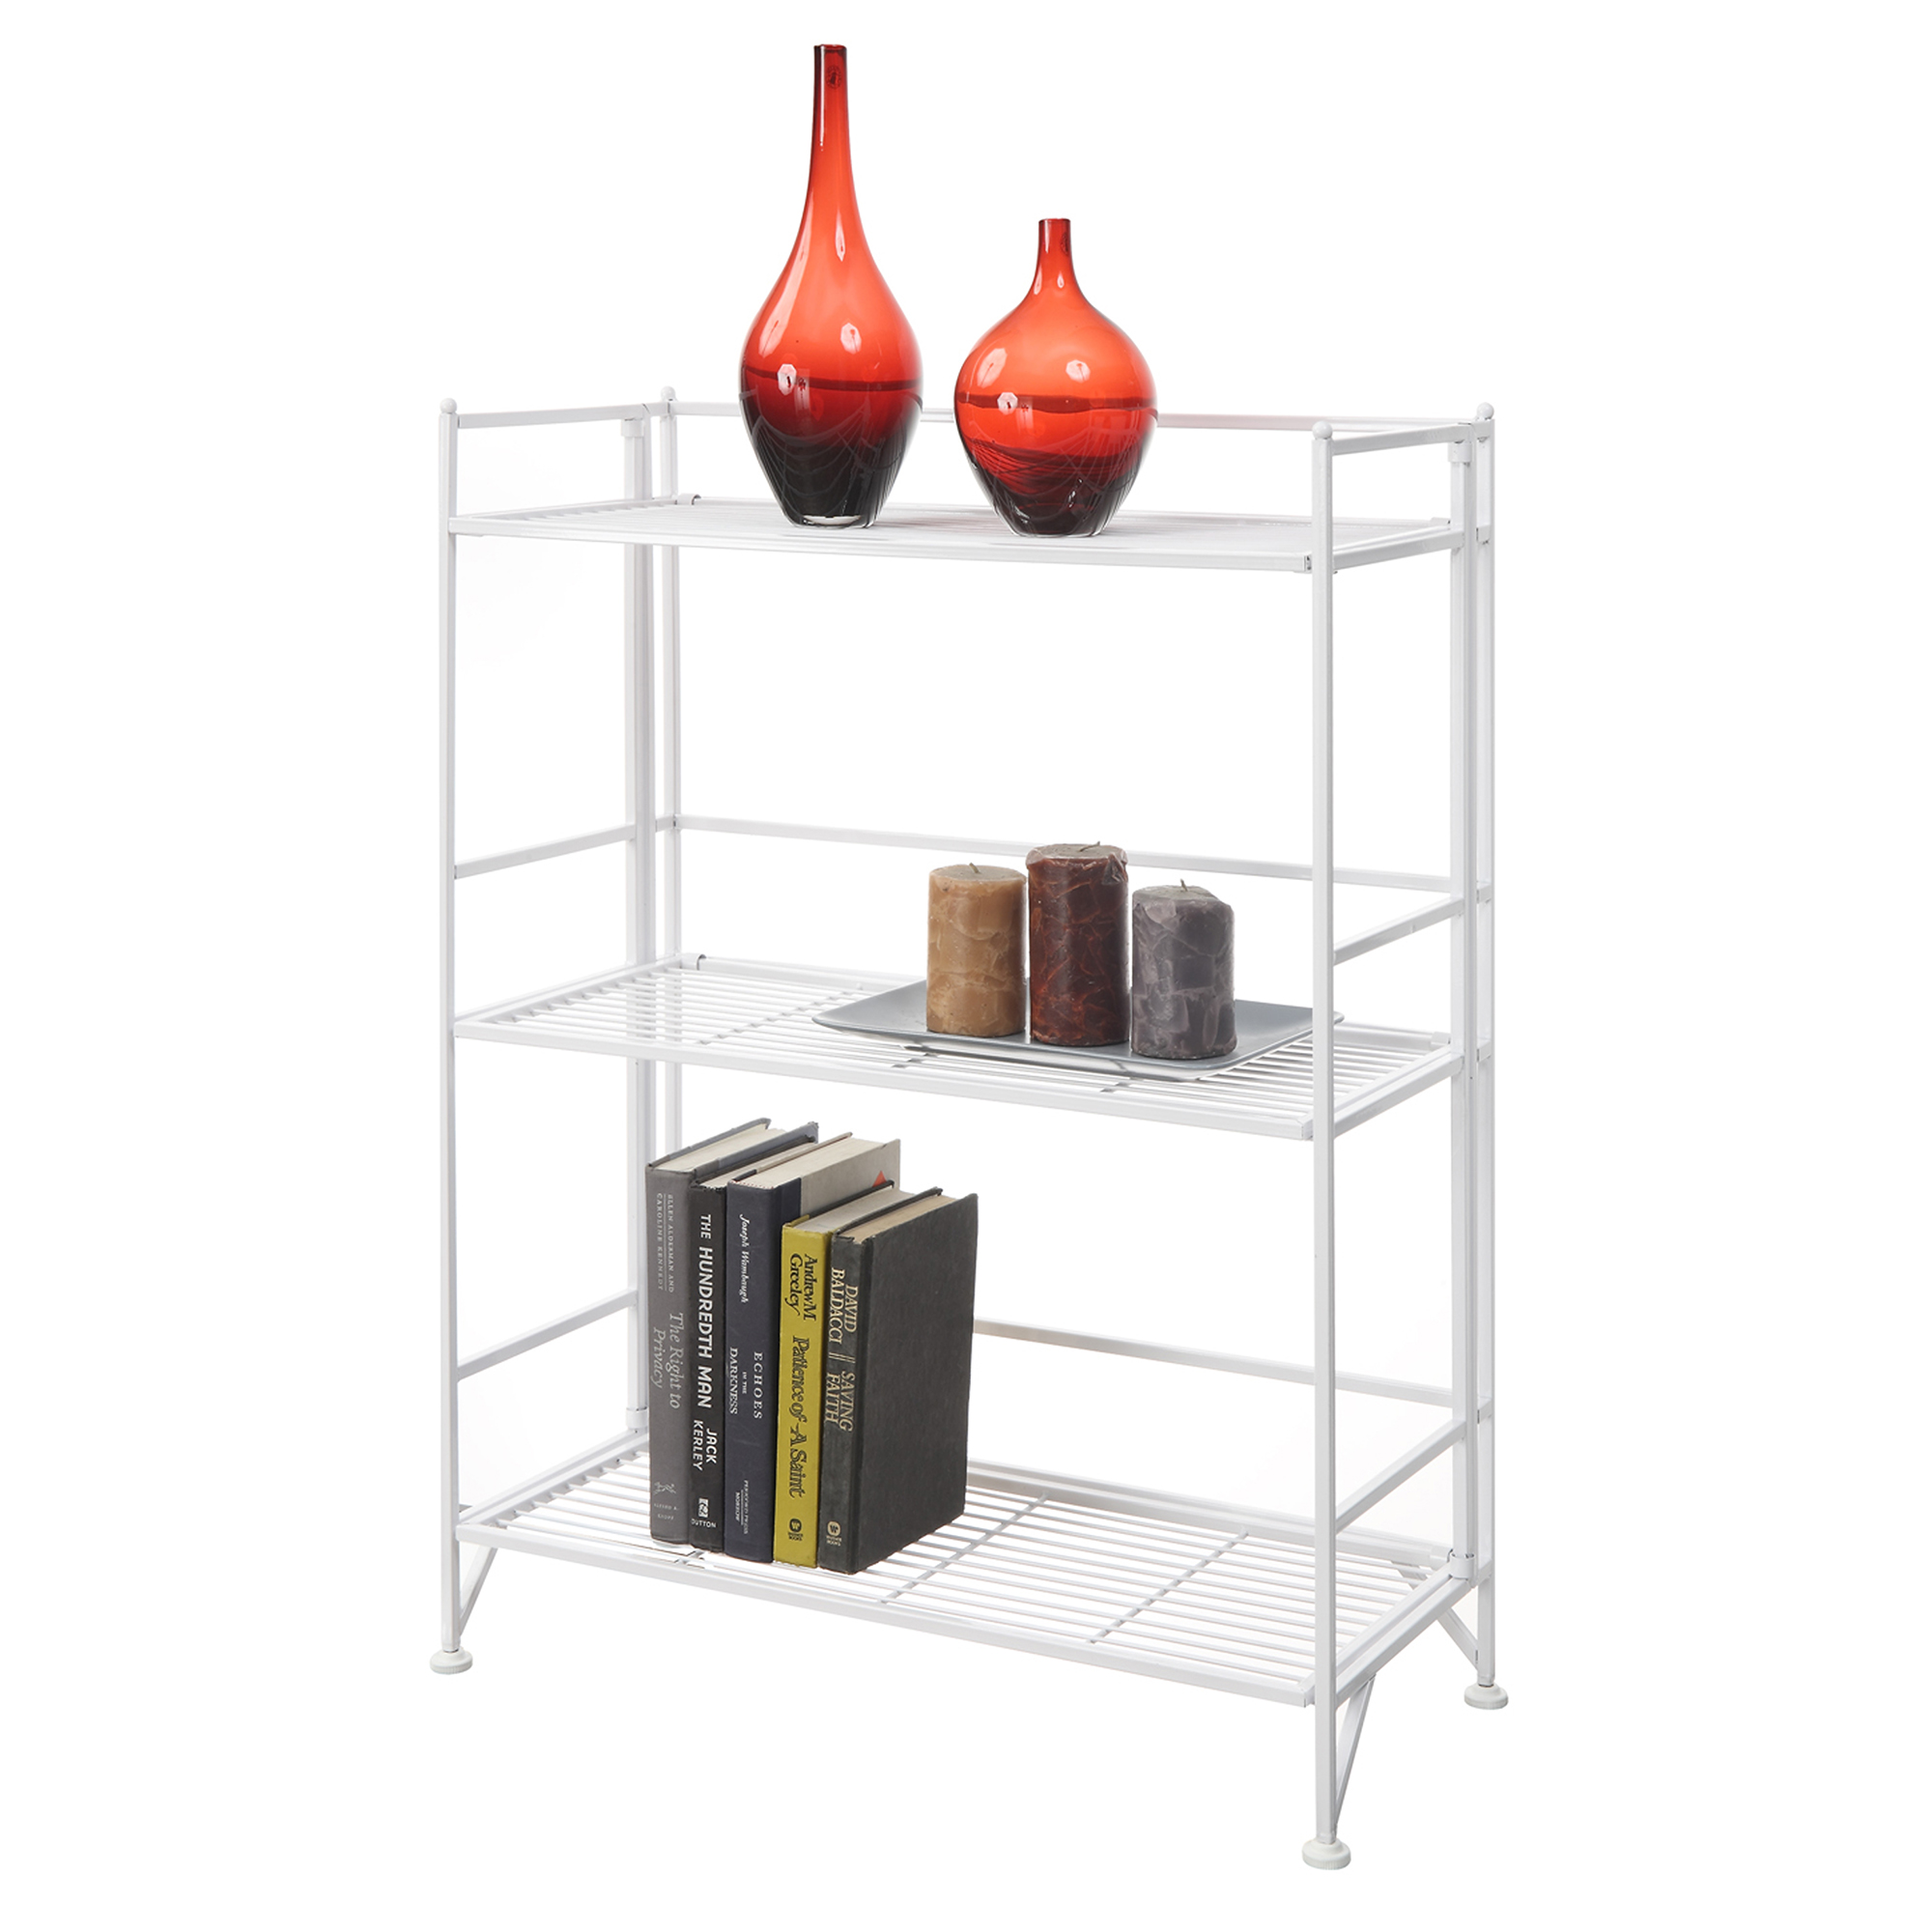 Convenience Concepts Xtra Storage 3 Tier Wide Folding Metal Shelf, White - image 4 of 7